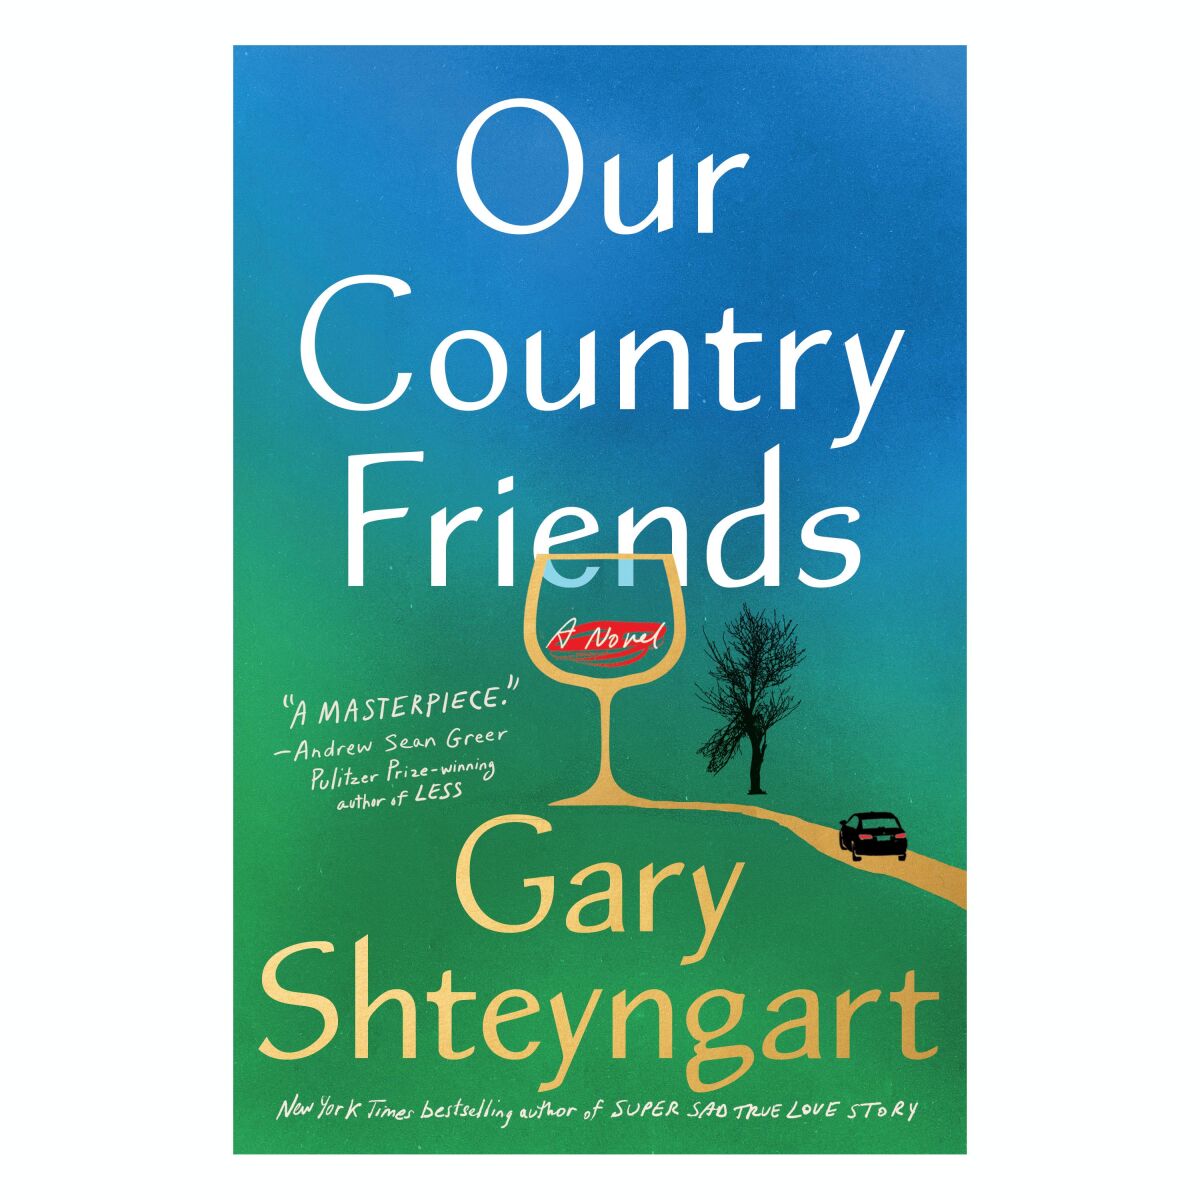 Book cover of "Our Country Friends" by Gary Shteyngart